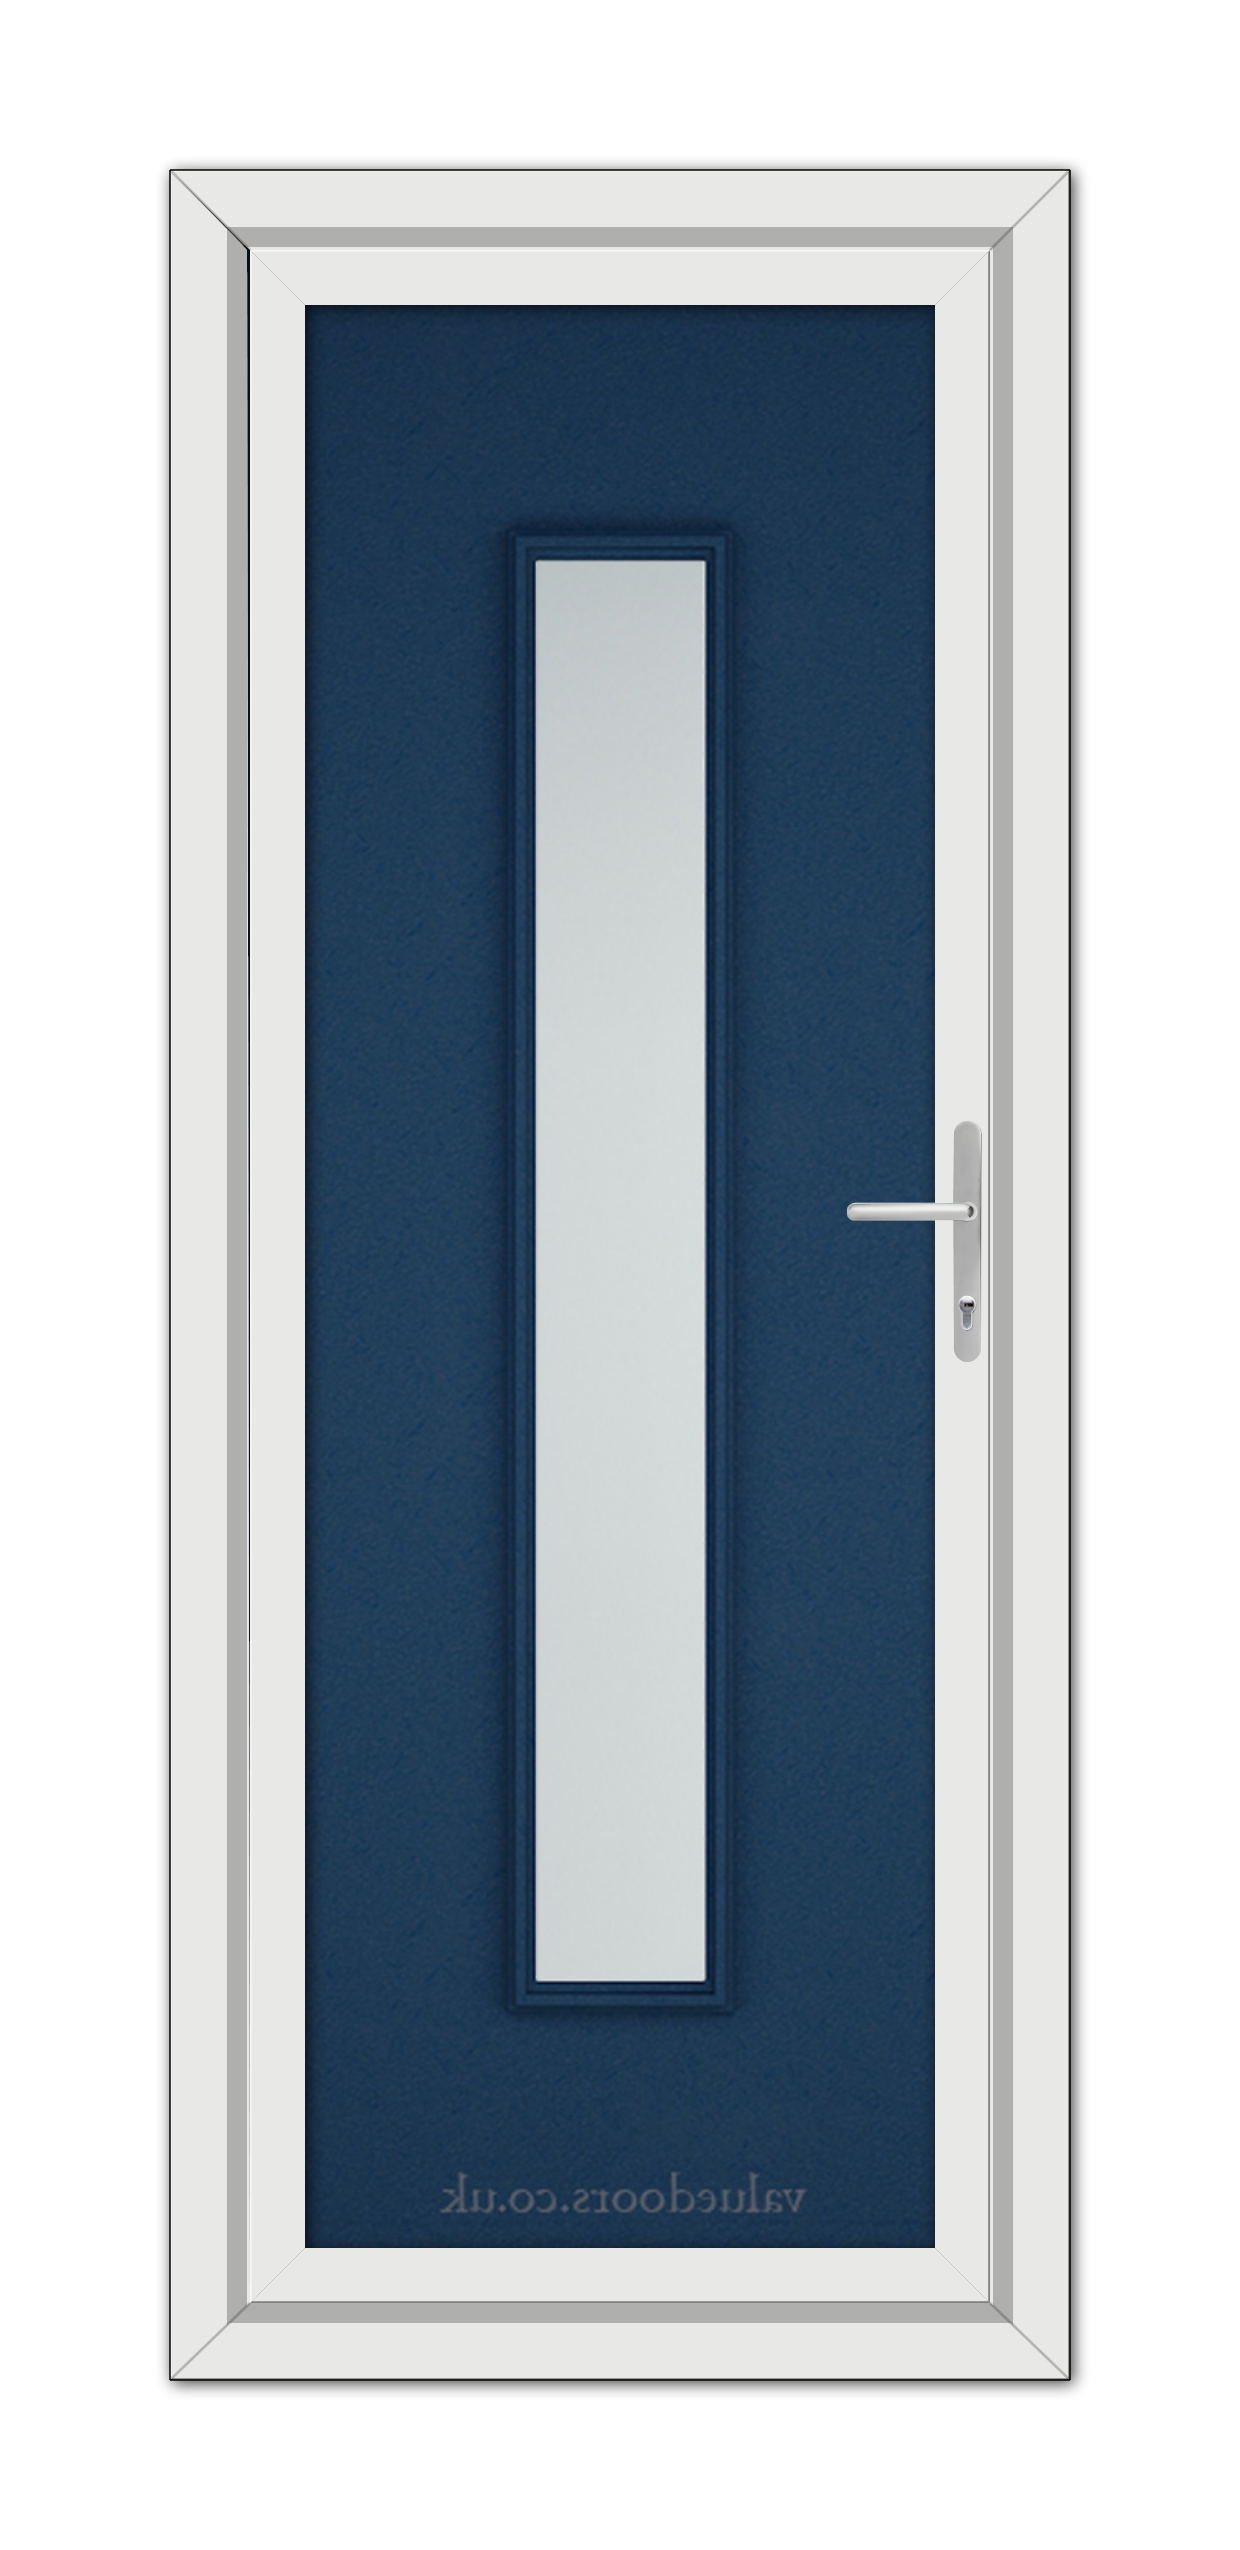 Modern Blue Rome uPVC Door with a vertical glass panel and a silver handle, set in a white frame.